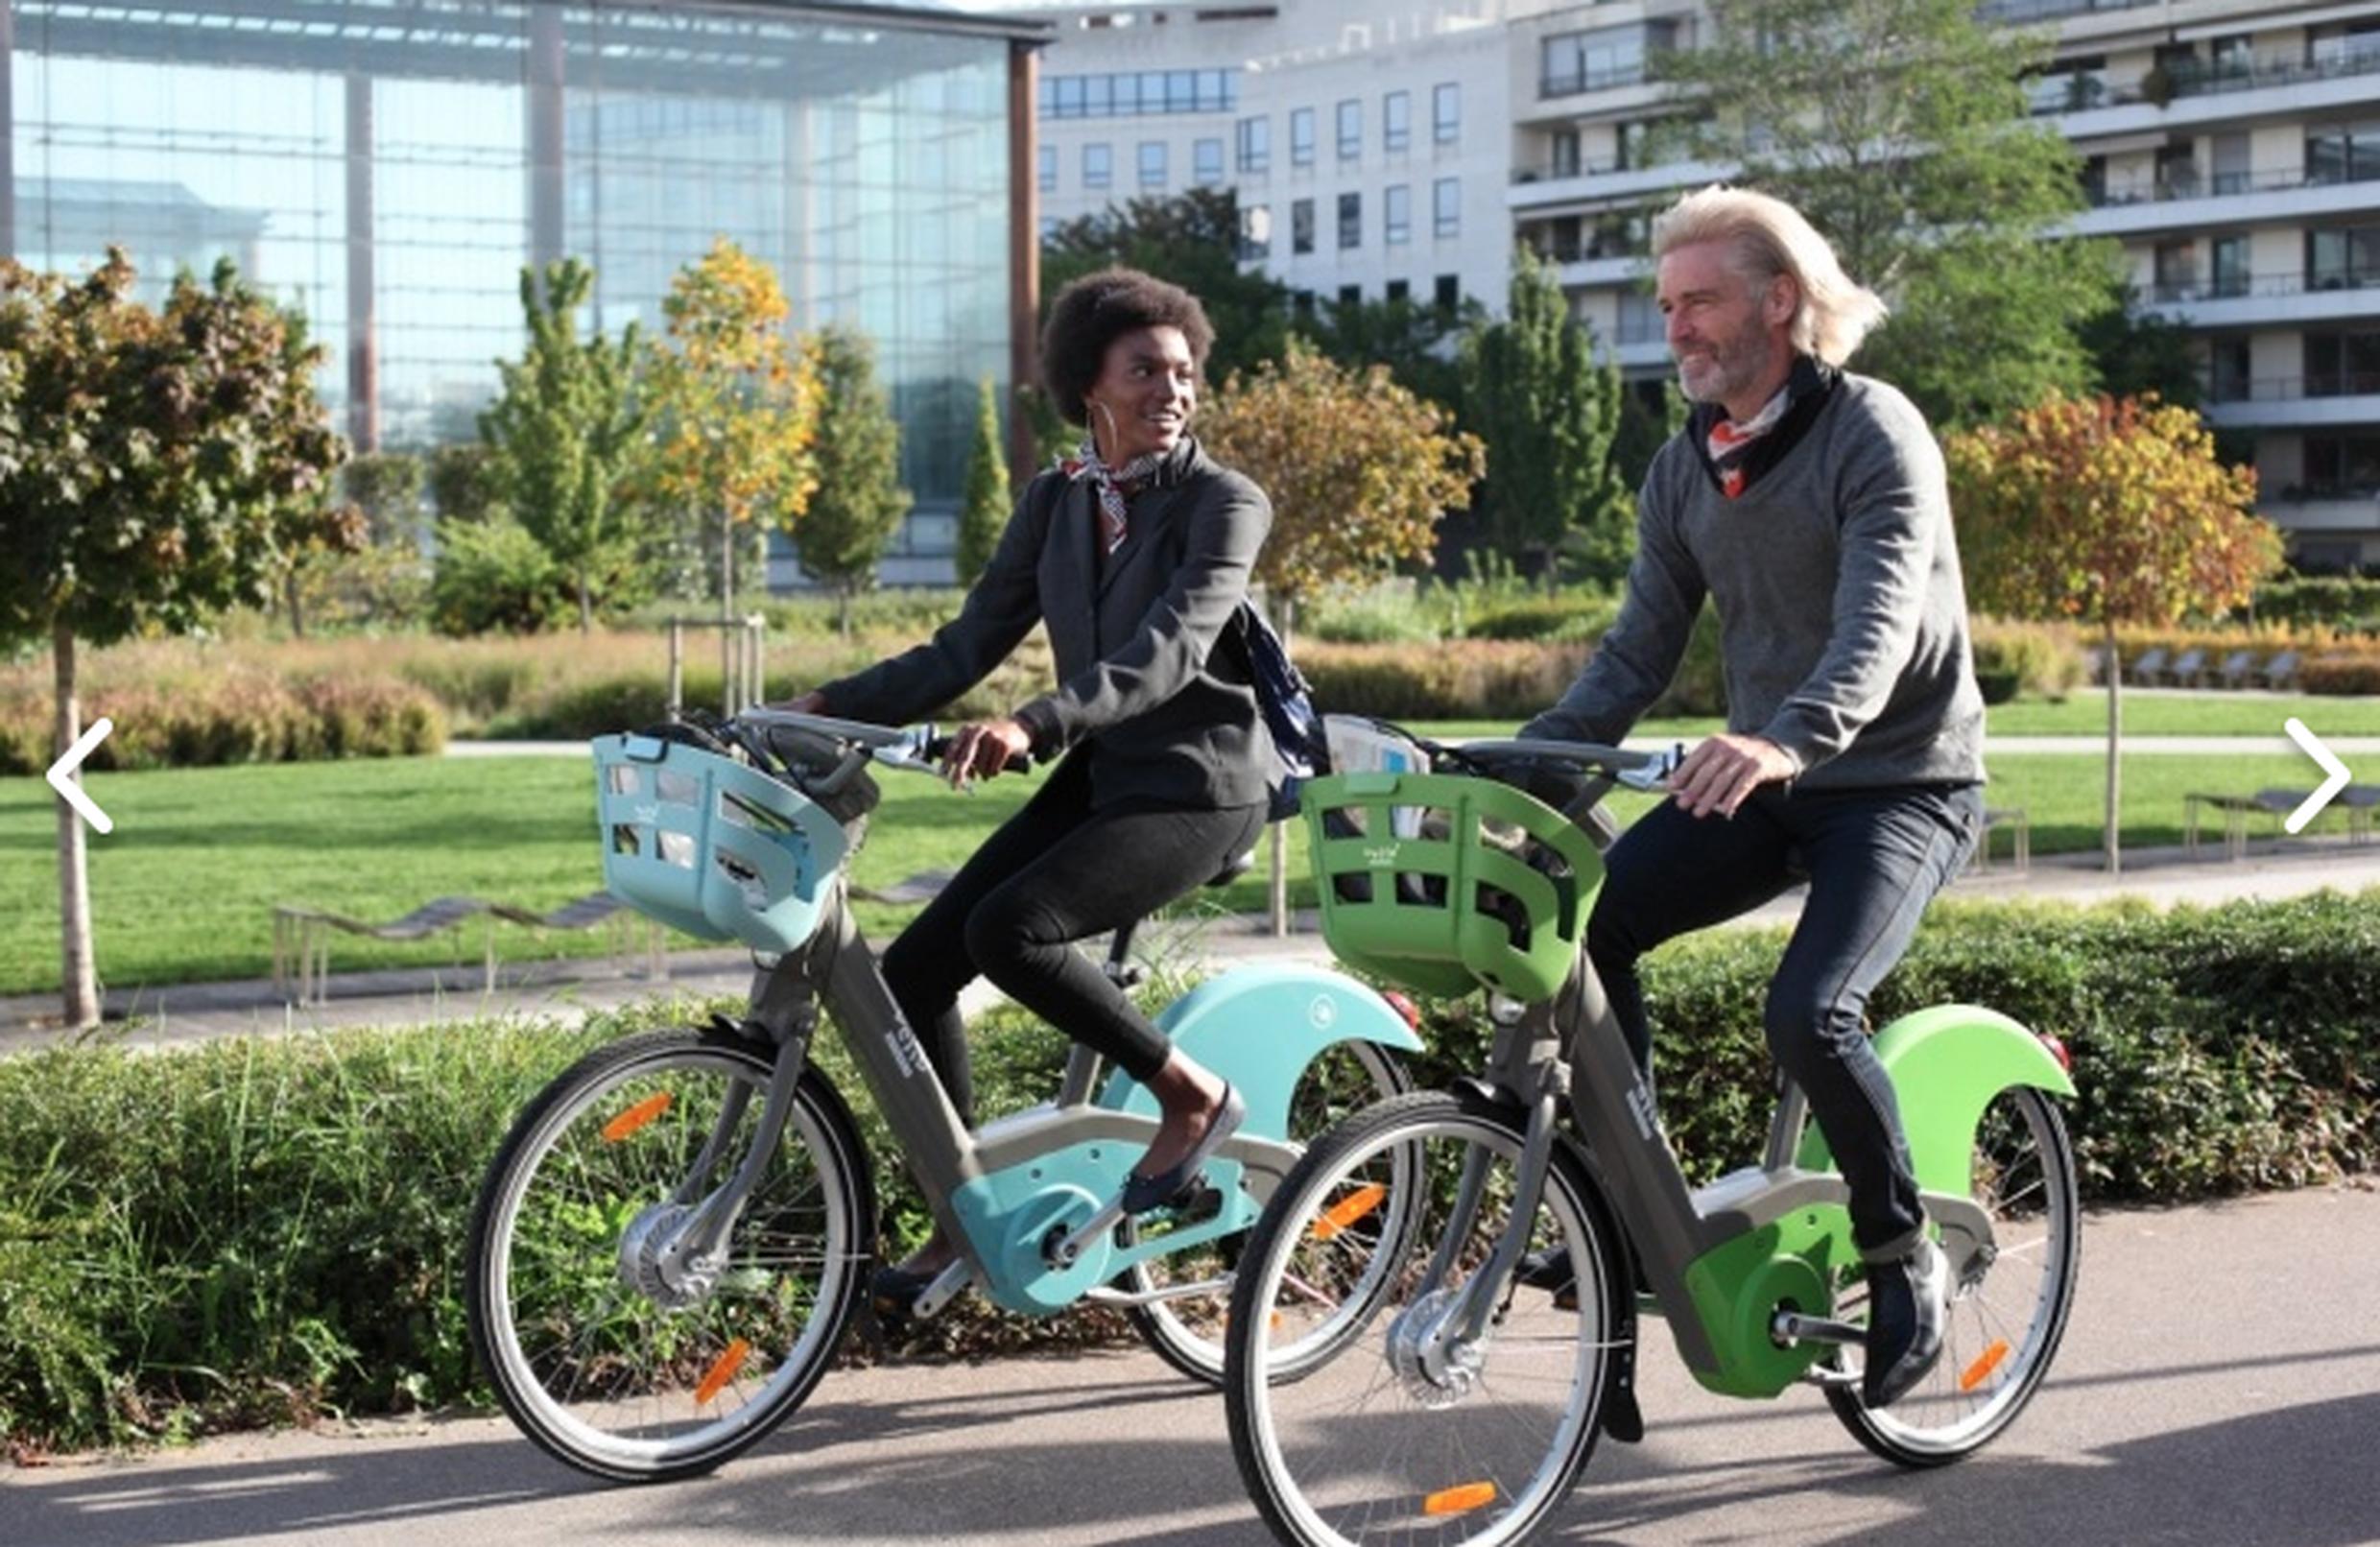 Smoove is a one-stop-shop bike share service supplier offering bikes, infrastructure and software solutions